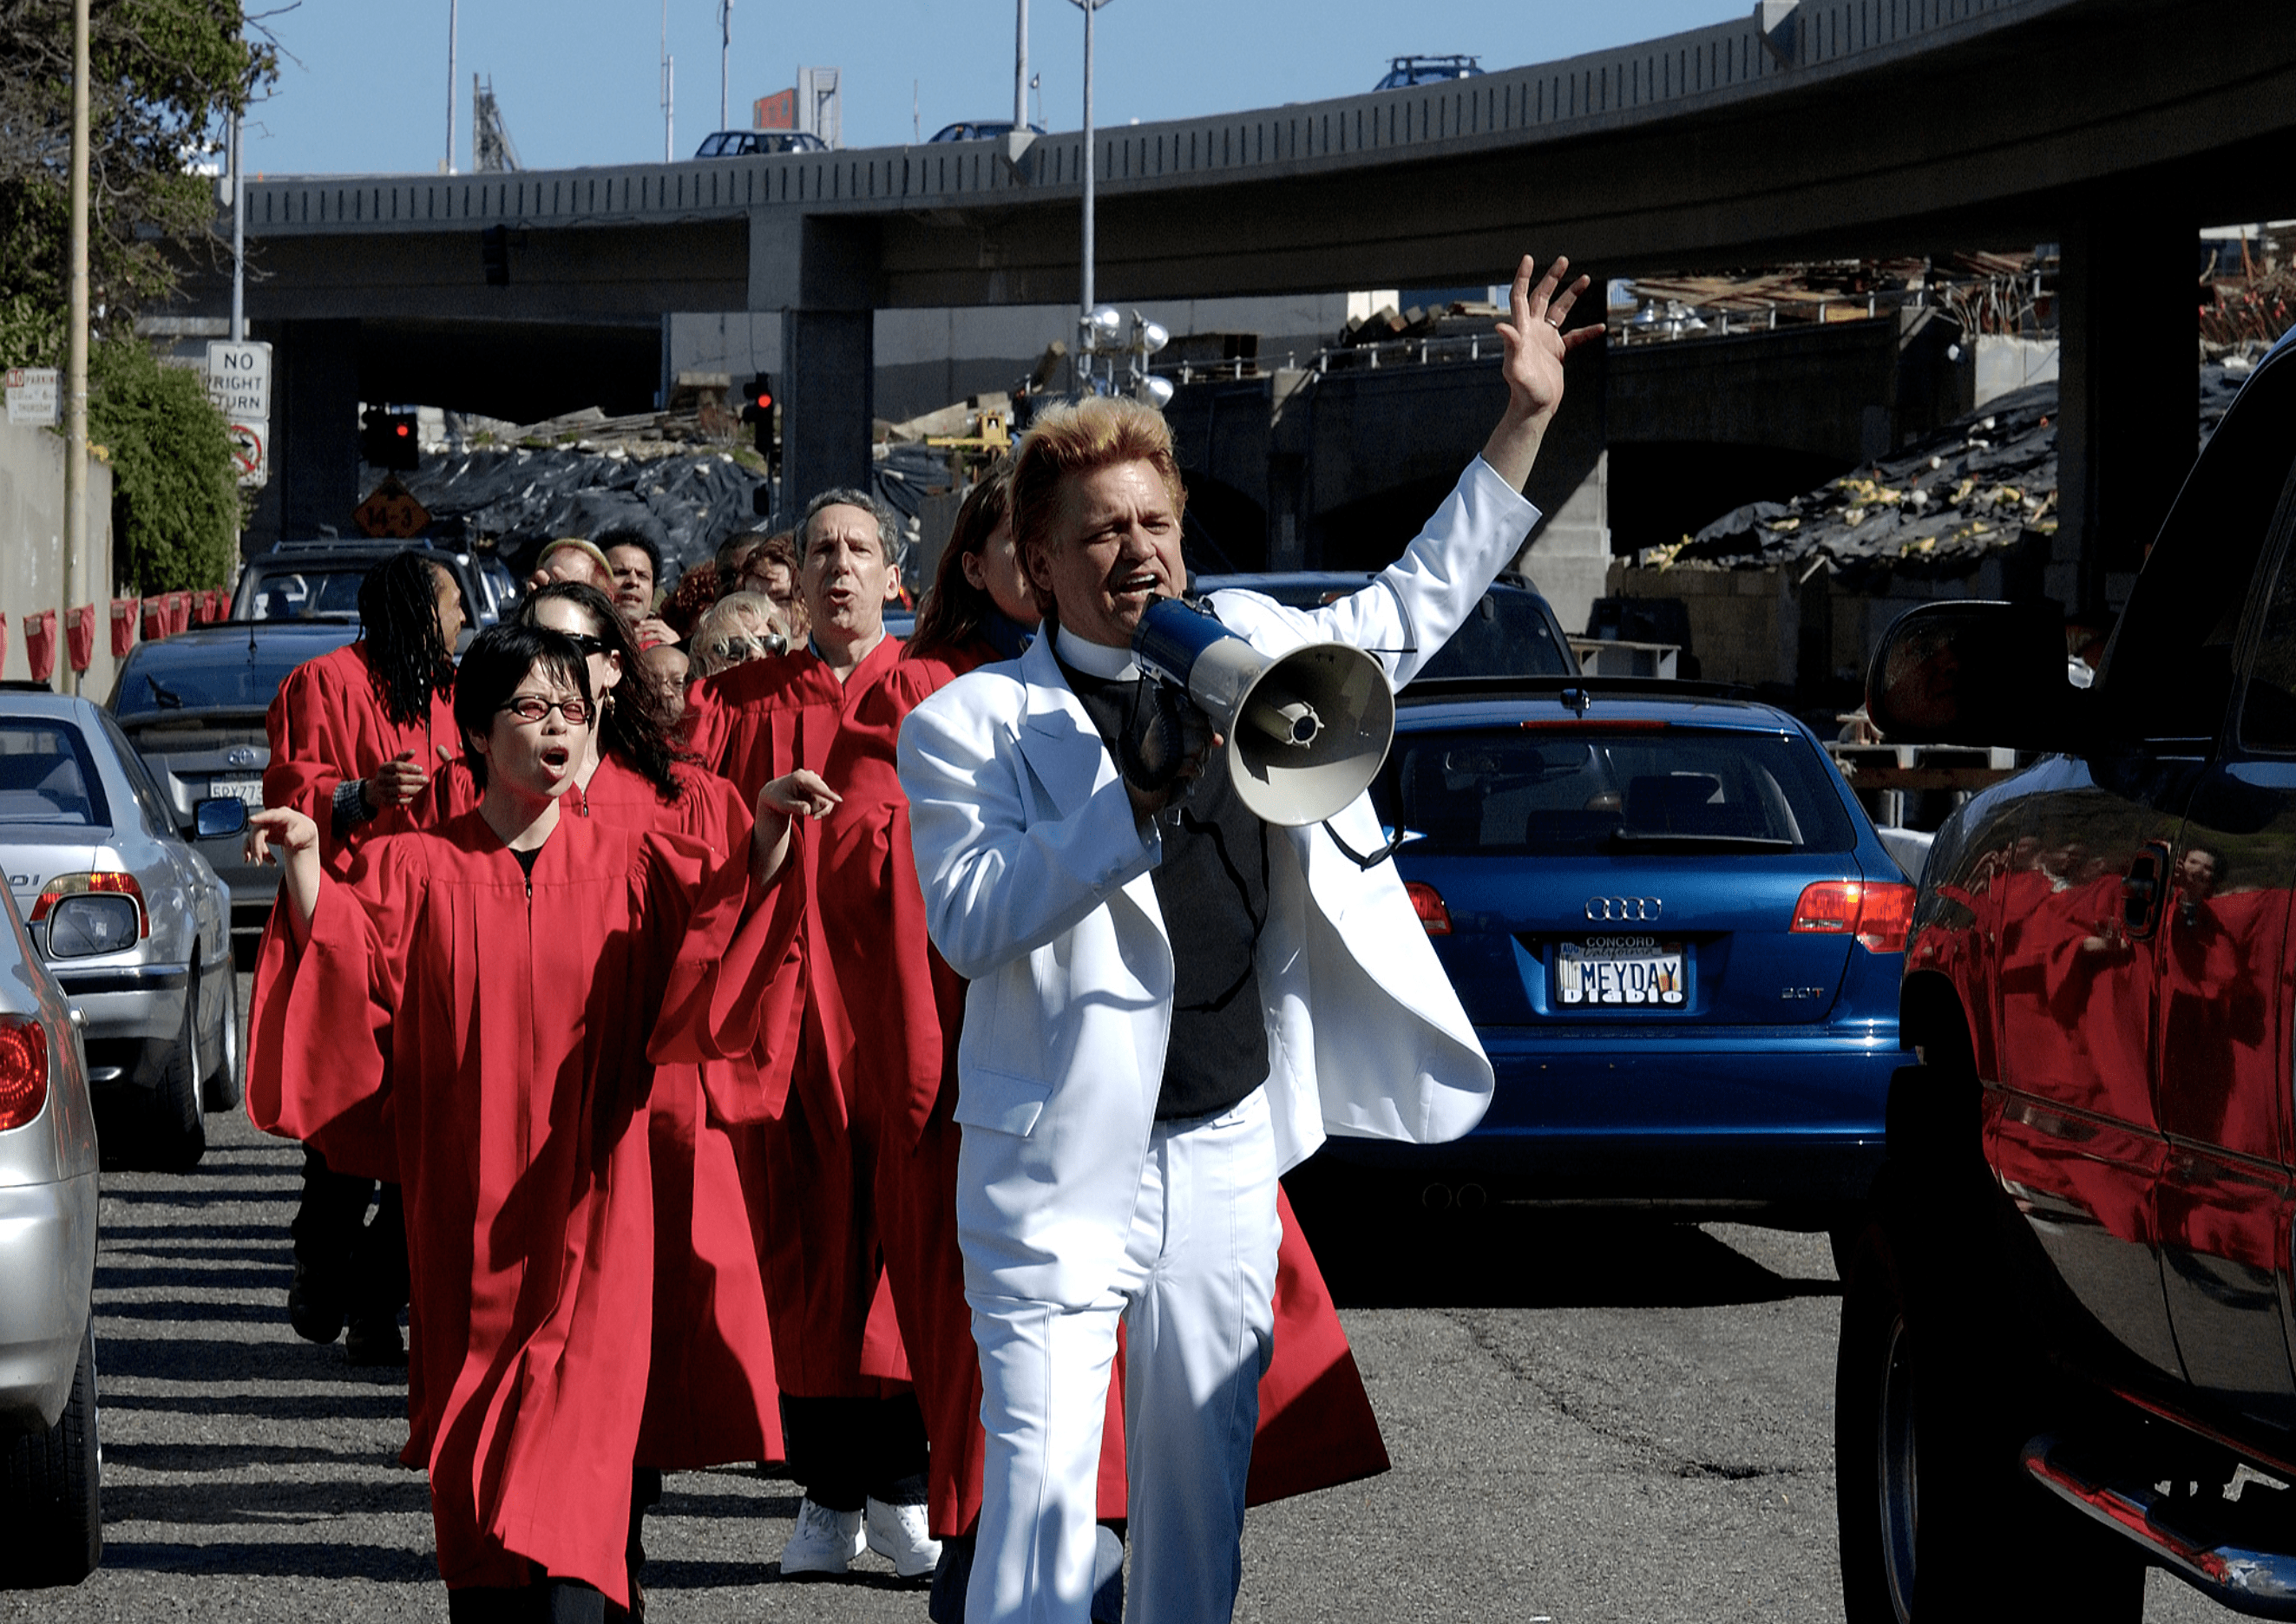 RevBilly leading The Stop Shopping Choir in red robes